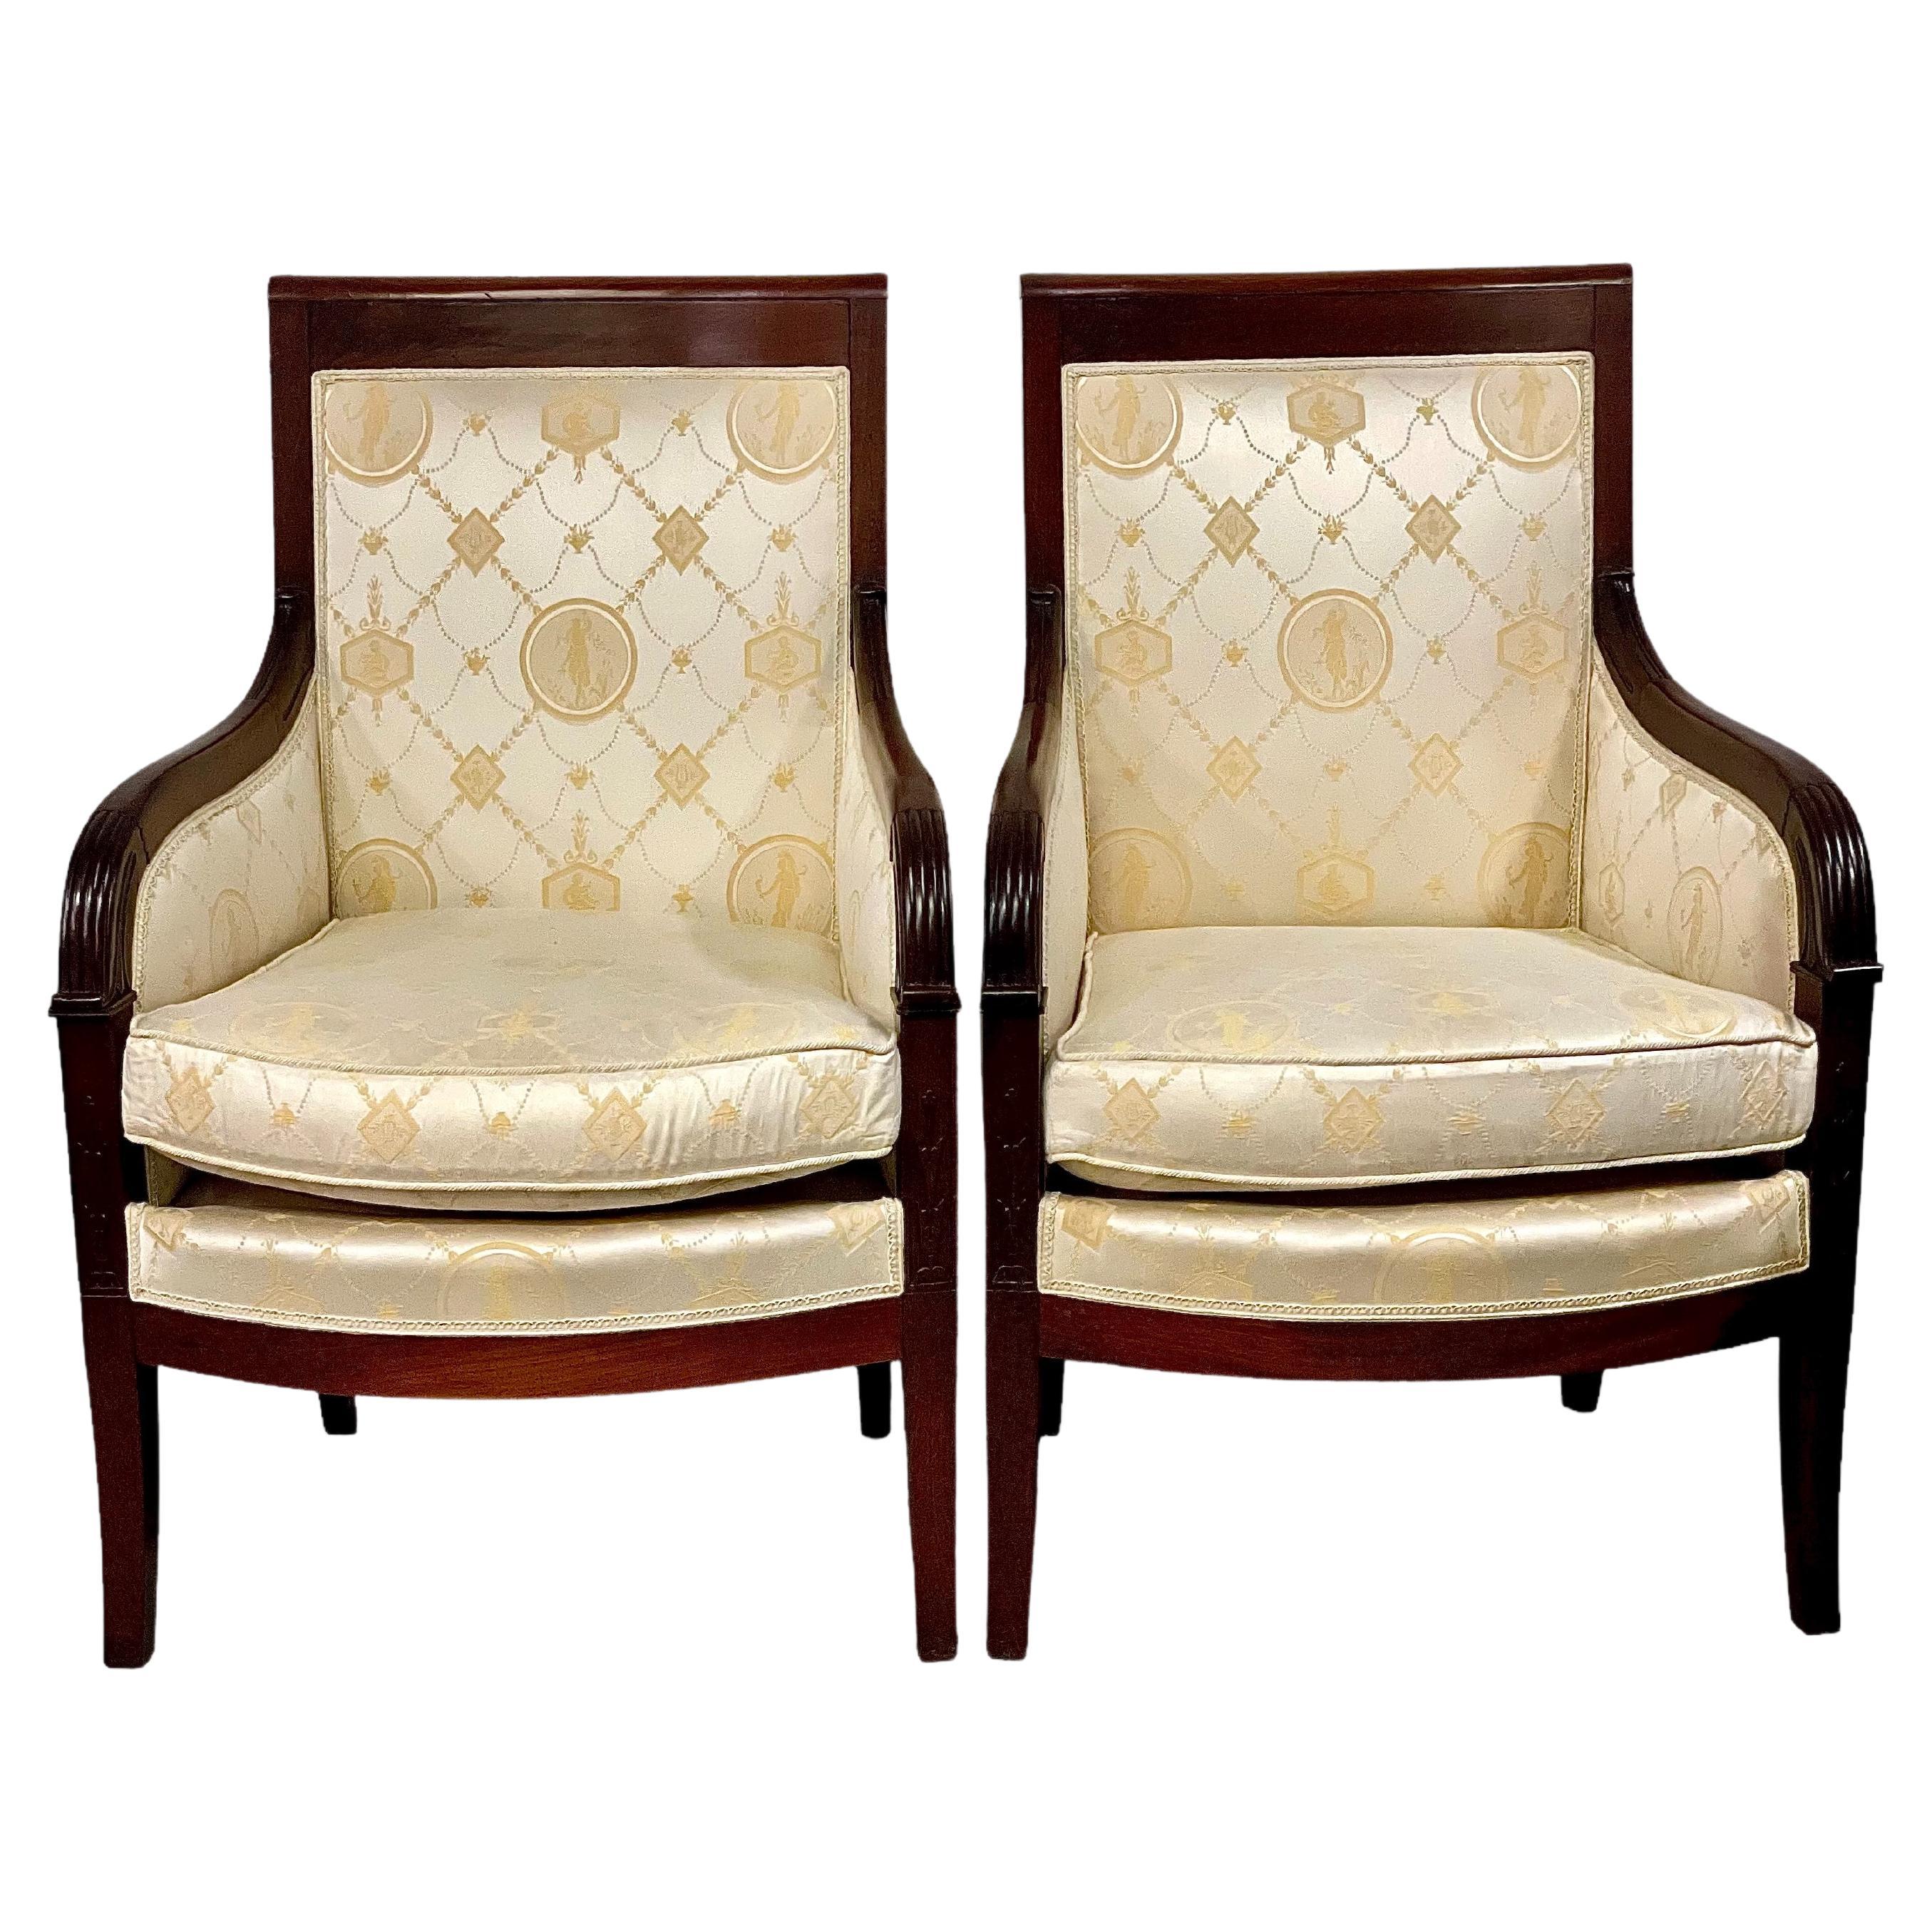 19th Century Pair of French Empire Bergeres Armchairs